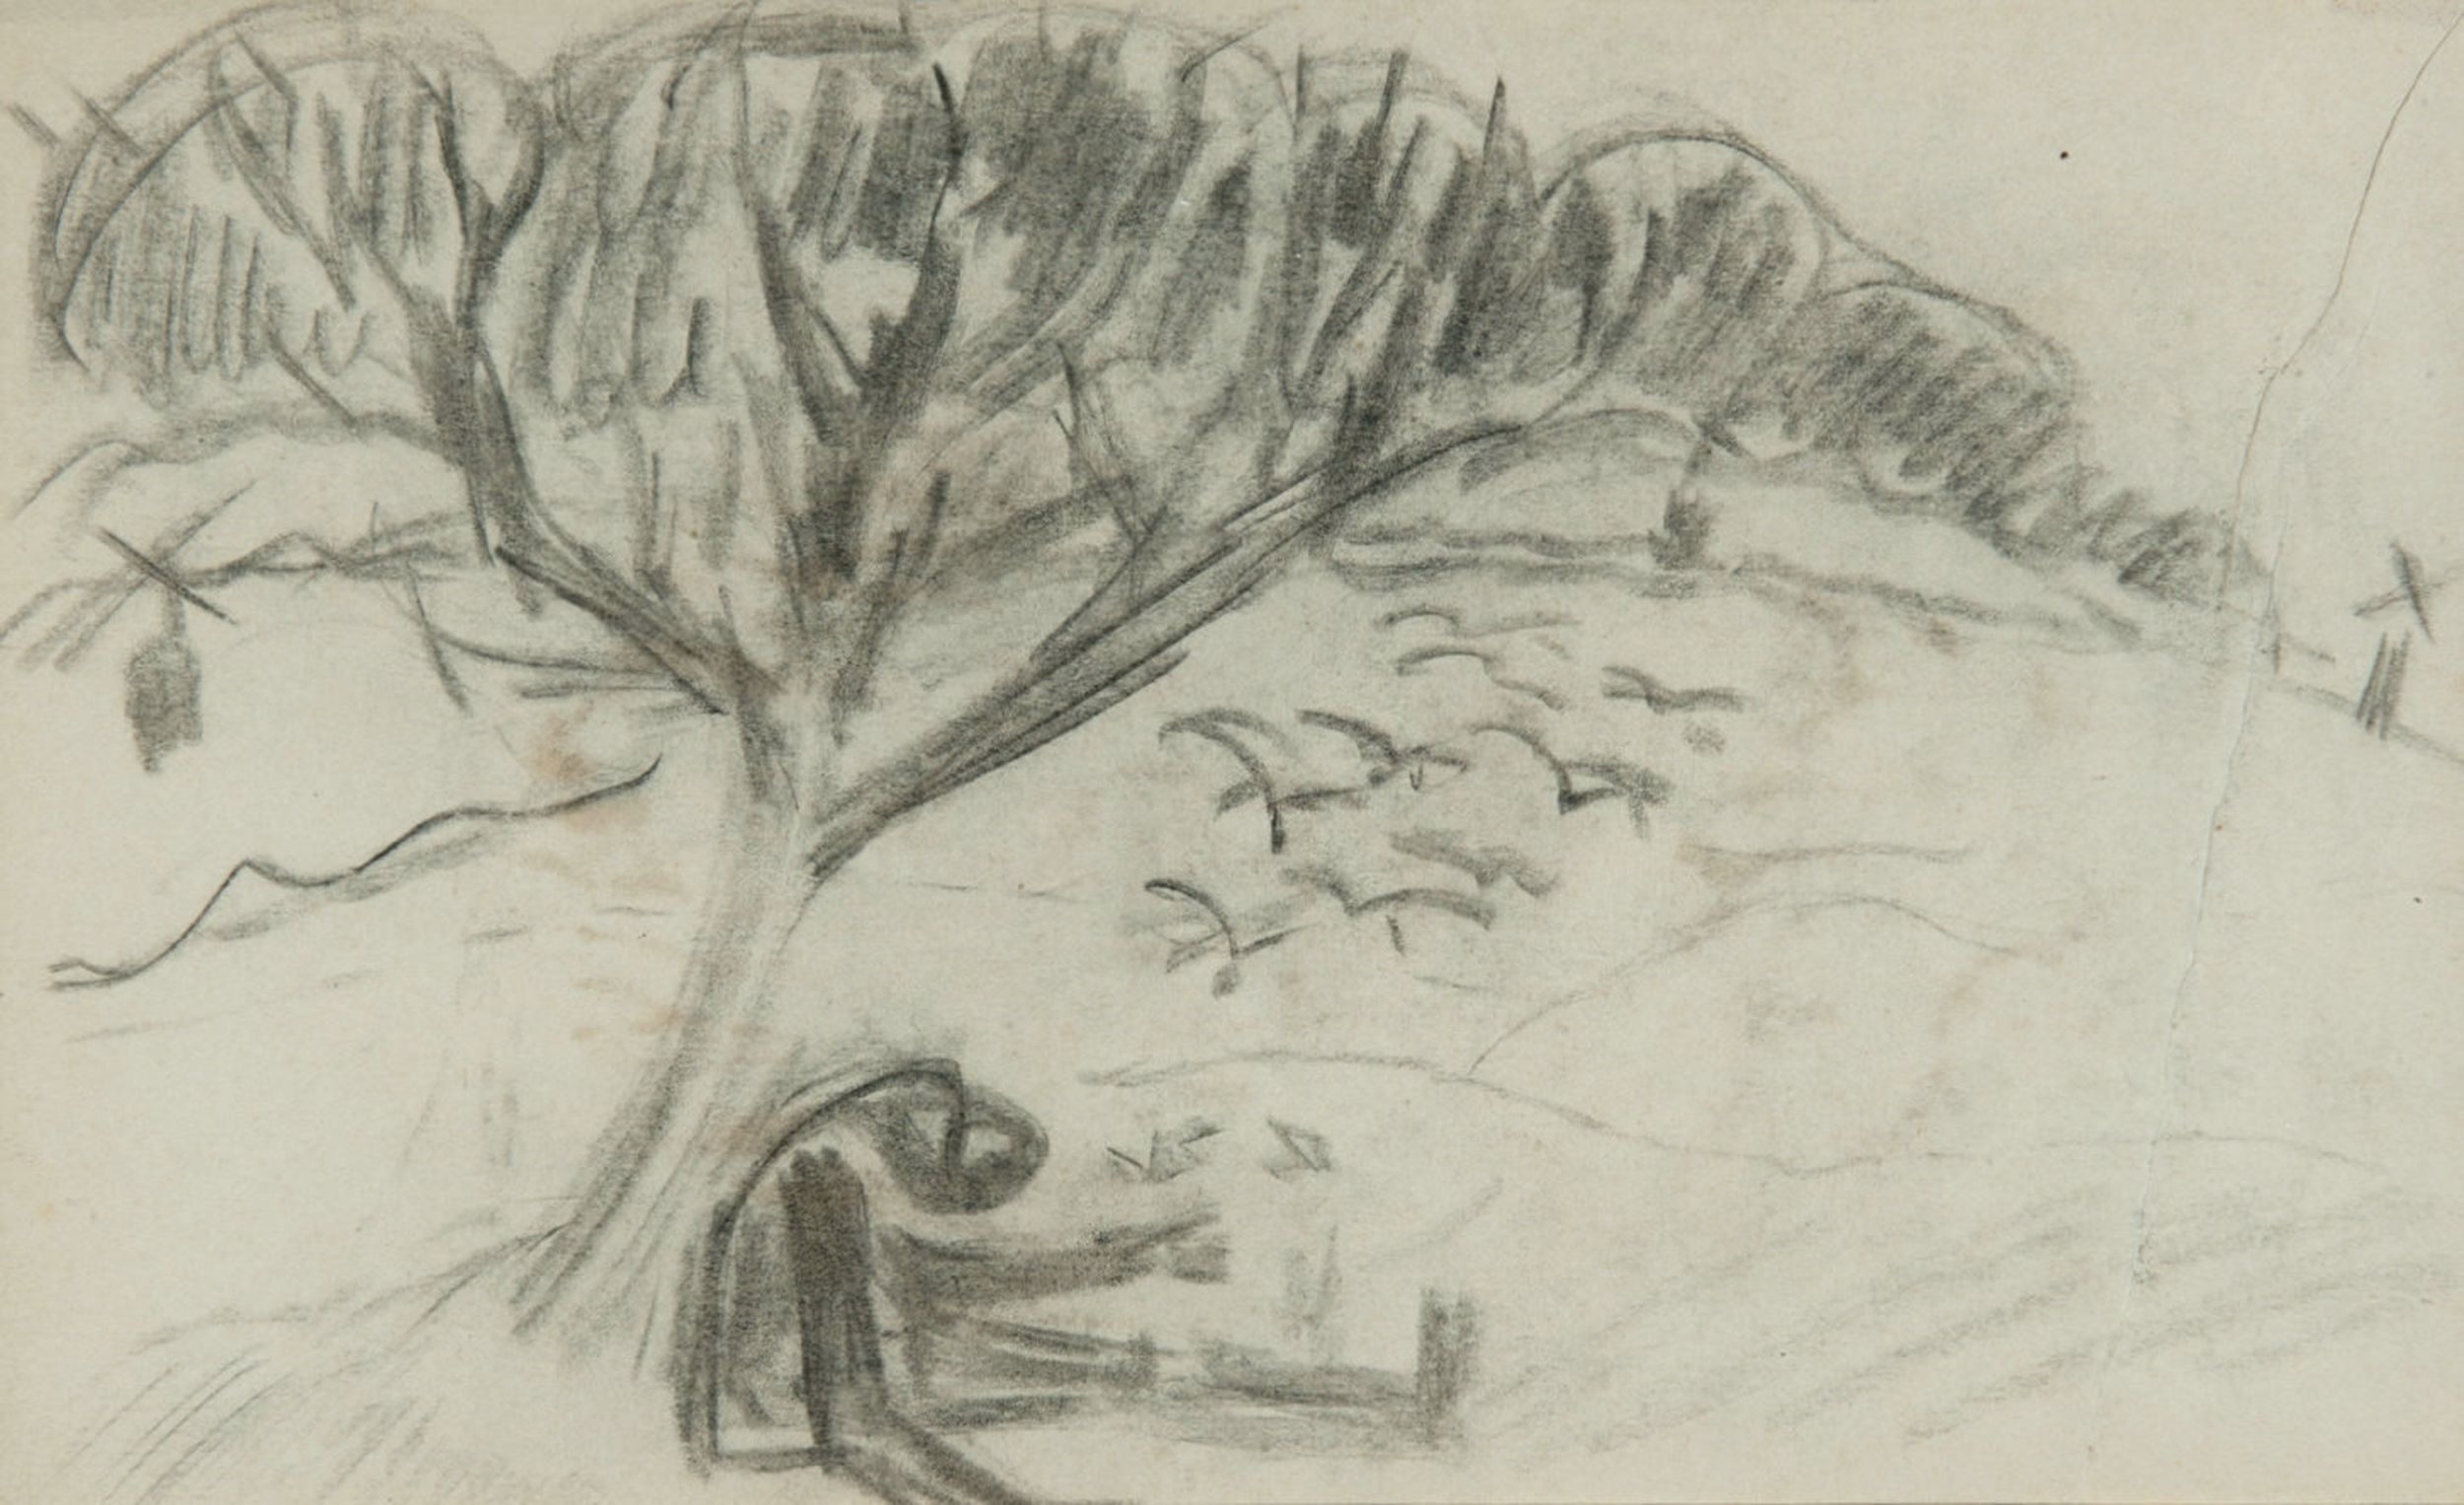 Desperate figure under a tree in a landscape - Verso: Faces by Frits van den Berghe, circa 1919 - 1920